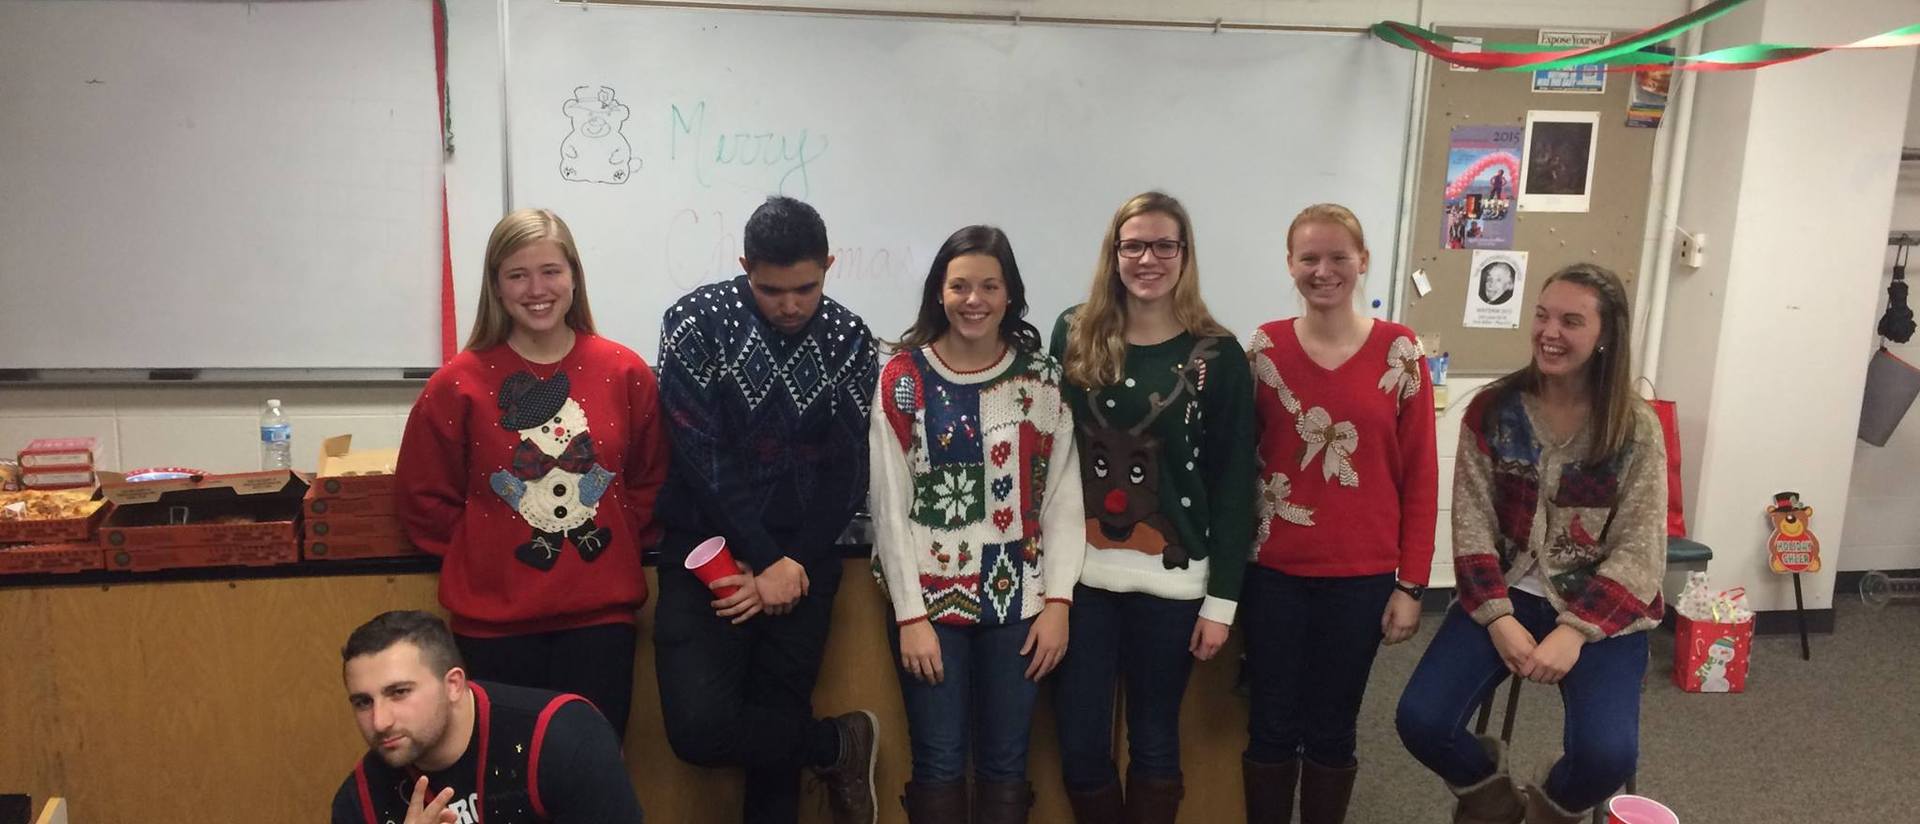 Chemistry and Christmas sweaters